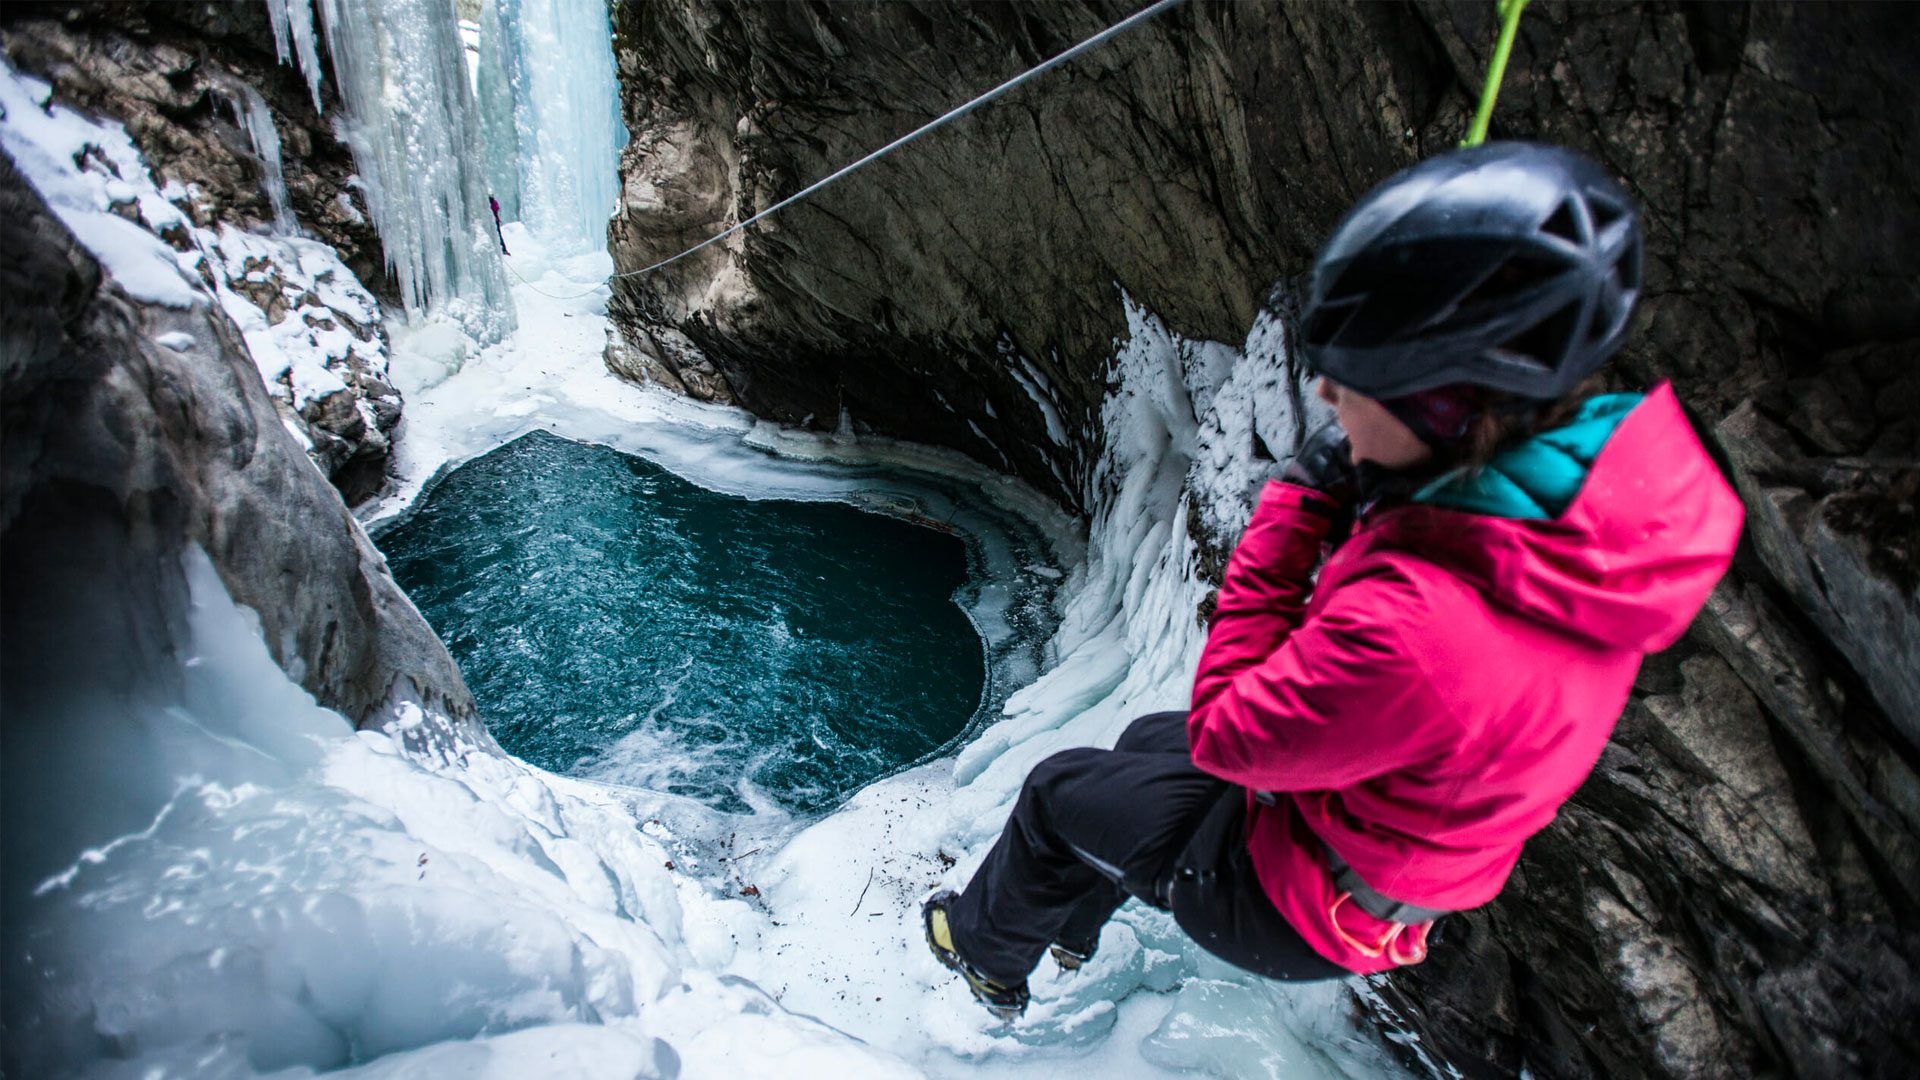 Frozen waterfall, ice cold water pond, woman rappelling